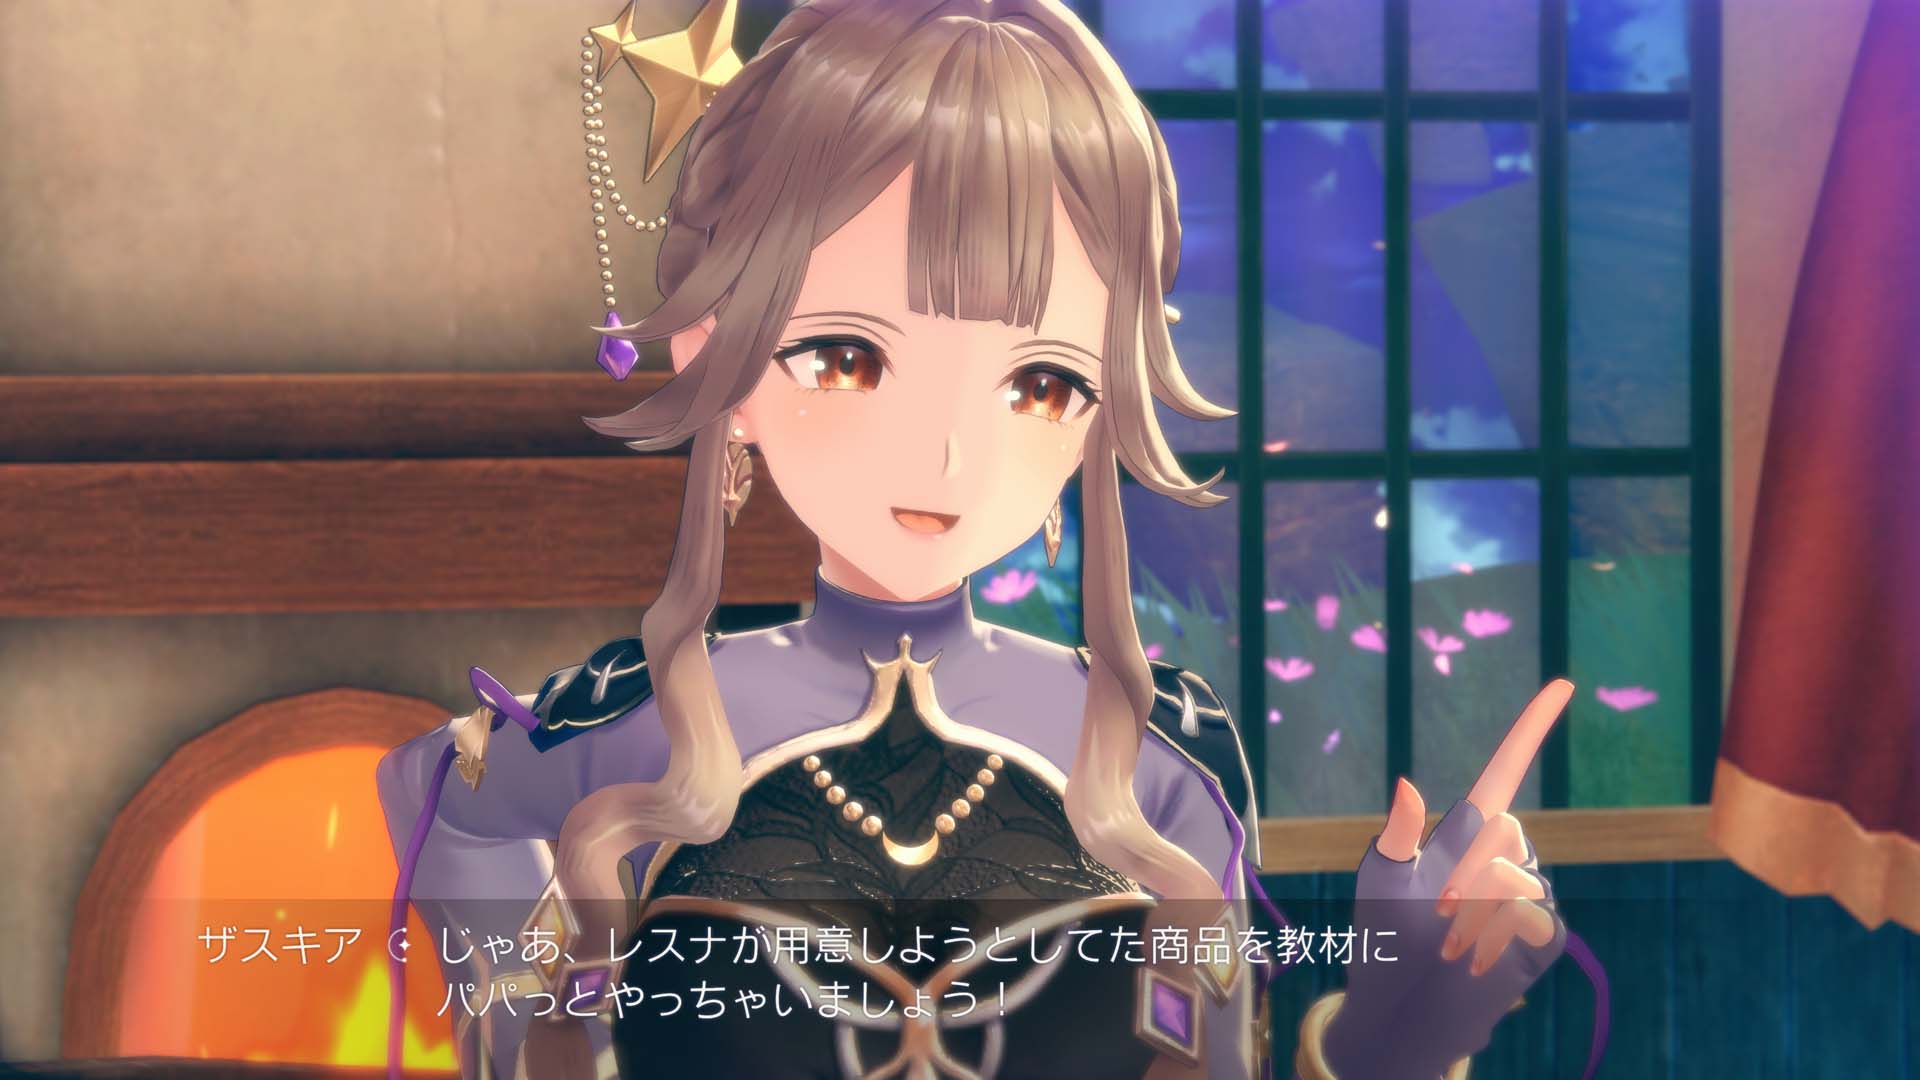 Atelier Resleriana launches for PC via Steam and mobile devices in ...